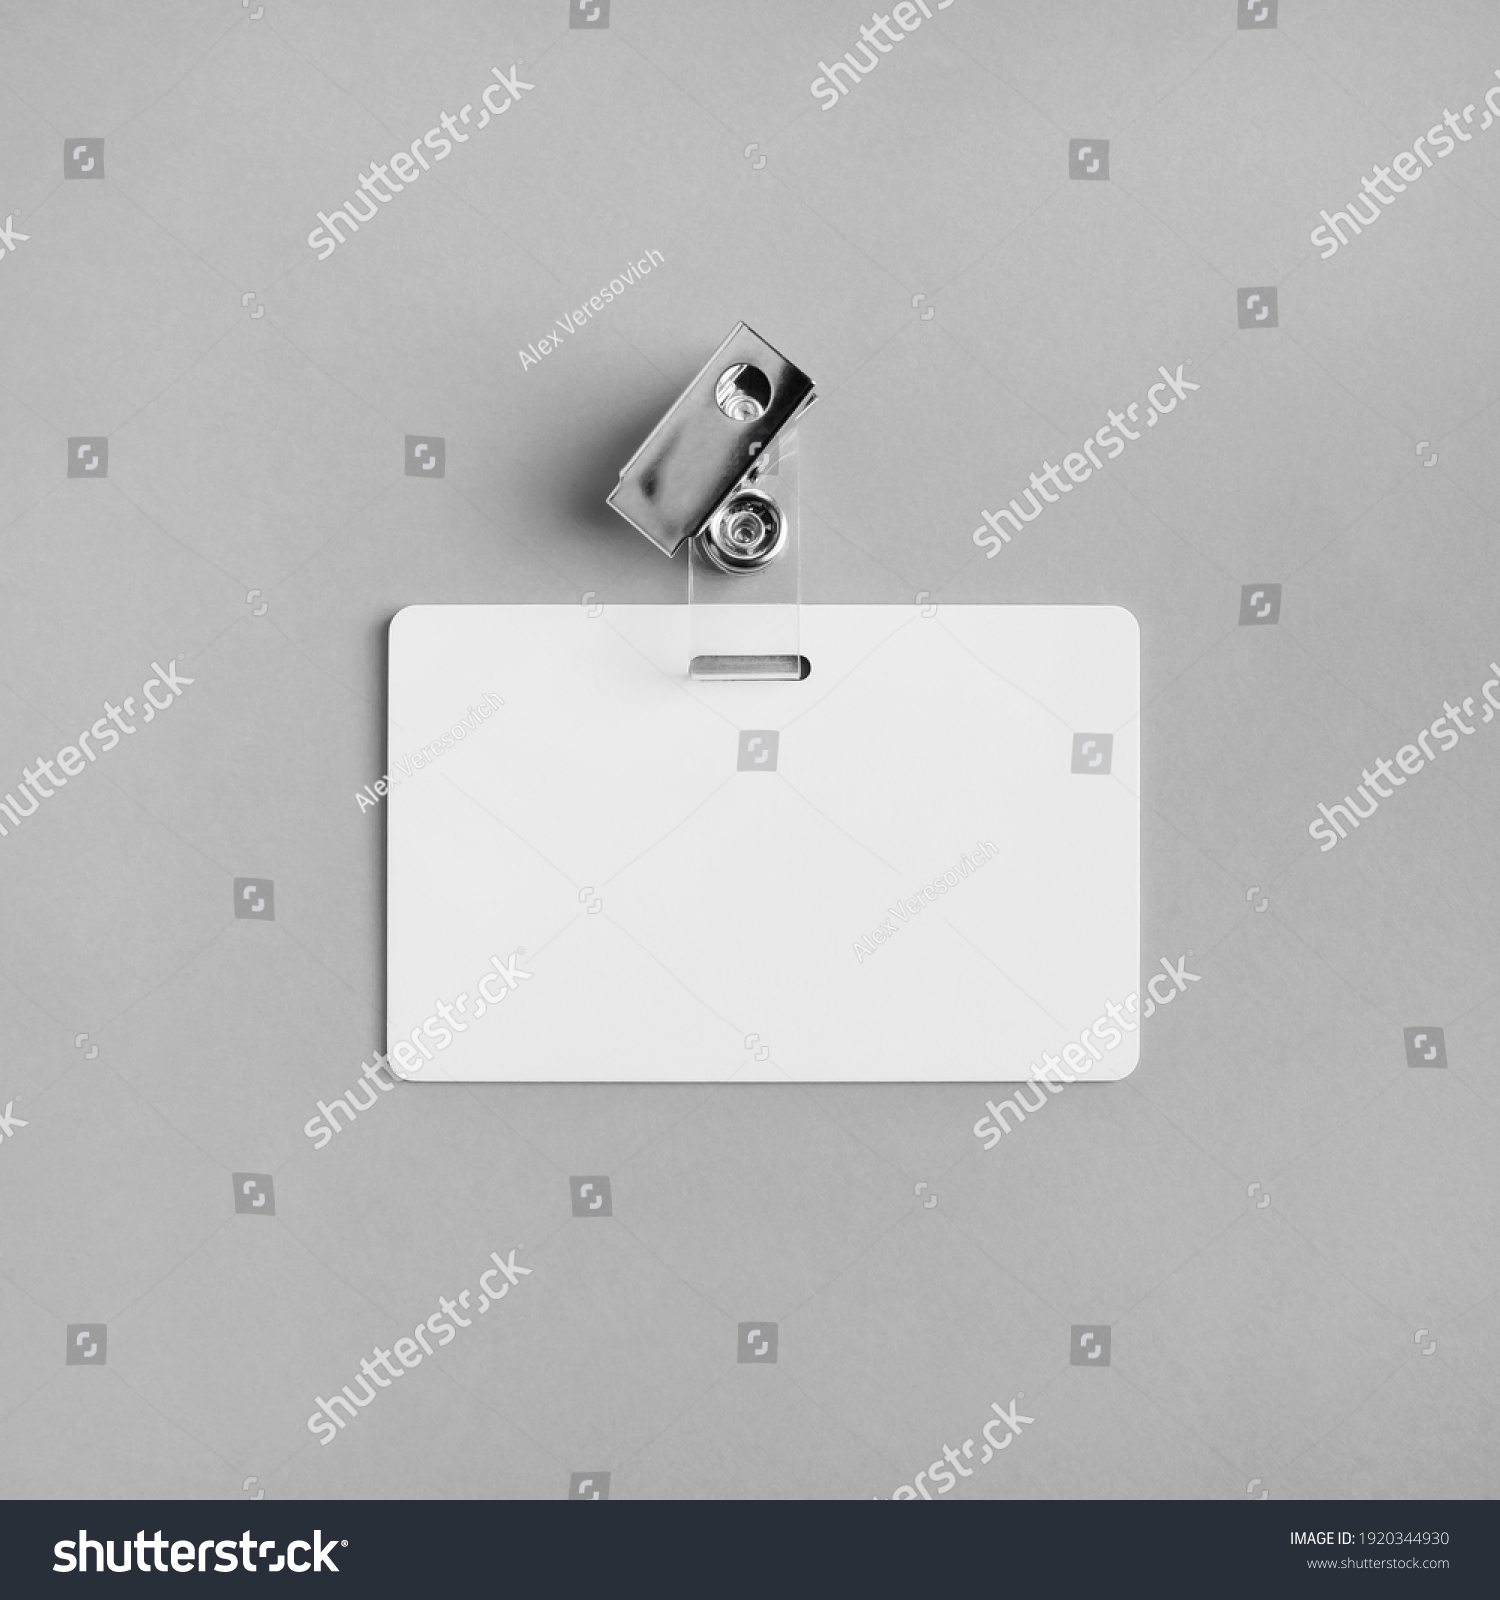 Blank white plastic badge on gray paper background. Responsive design template. Mock-up for your design. Flat lay. #1920344930